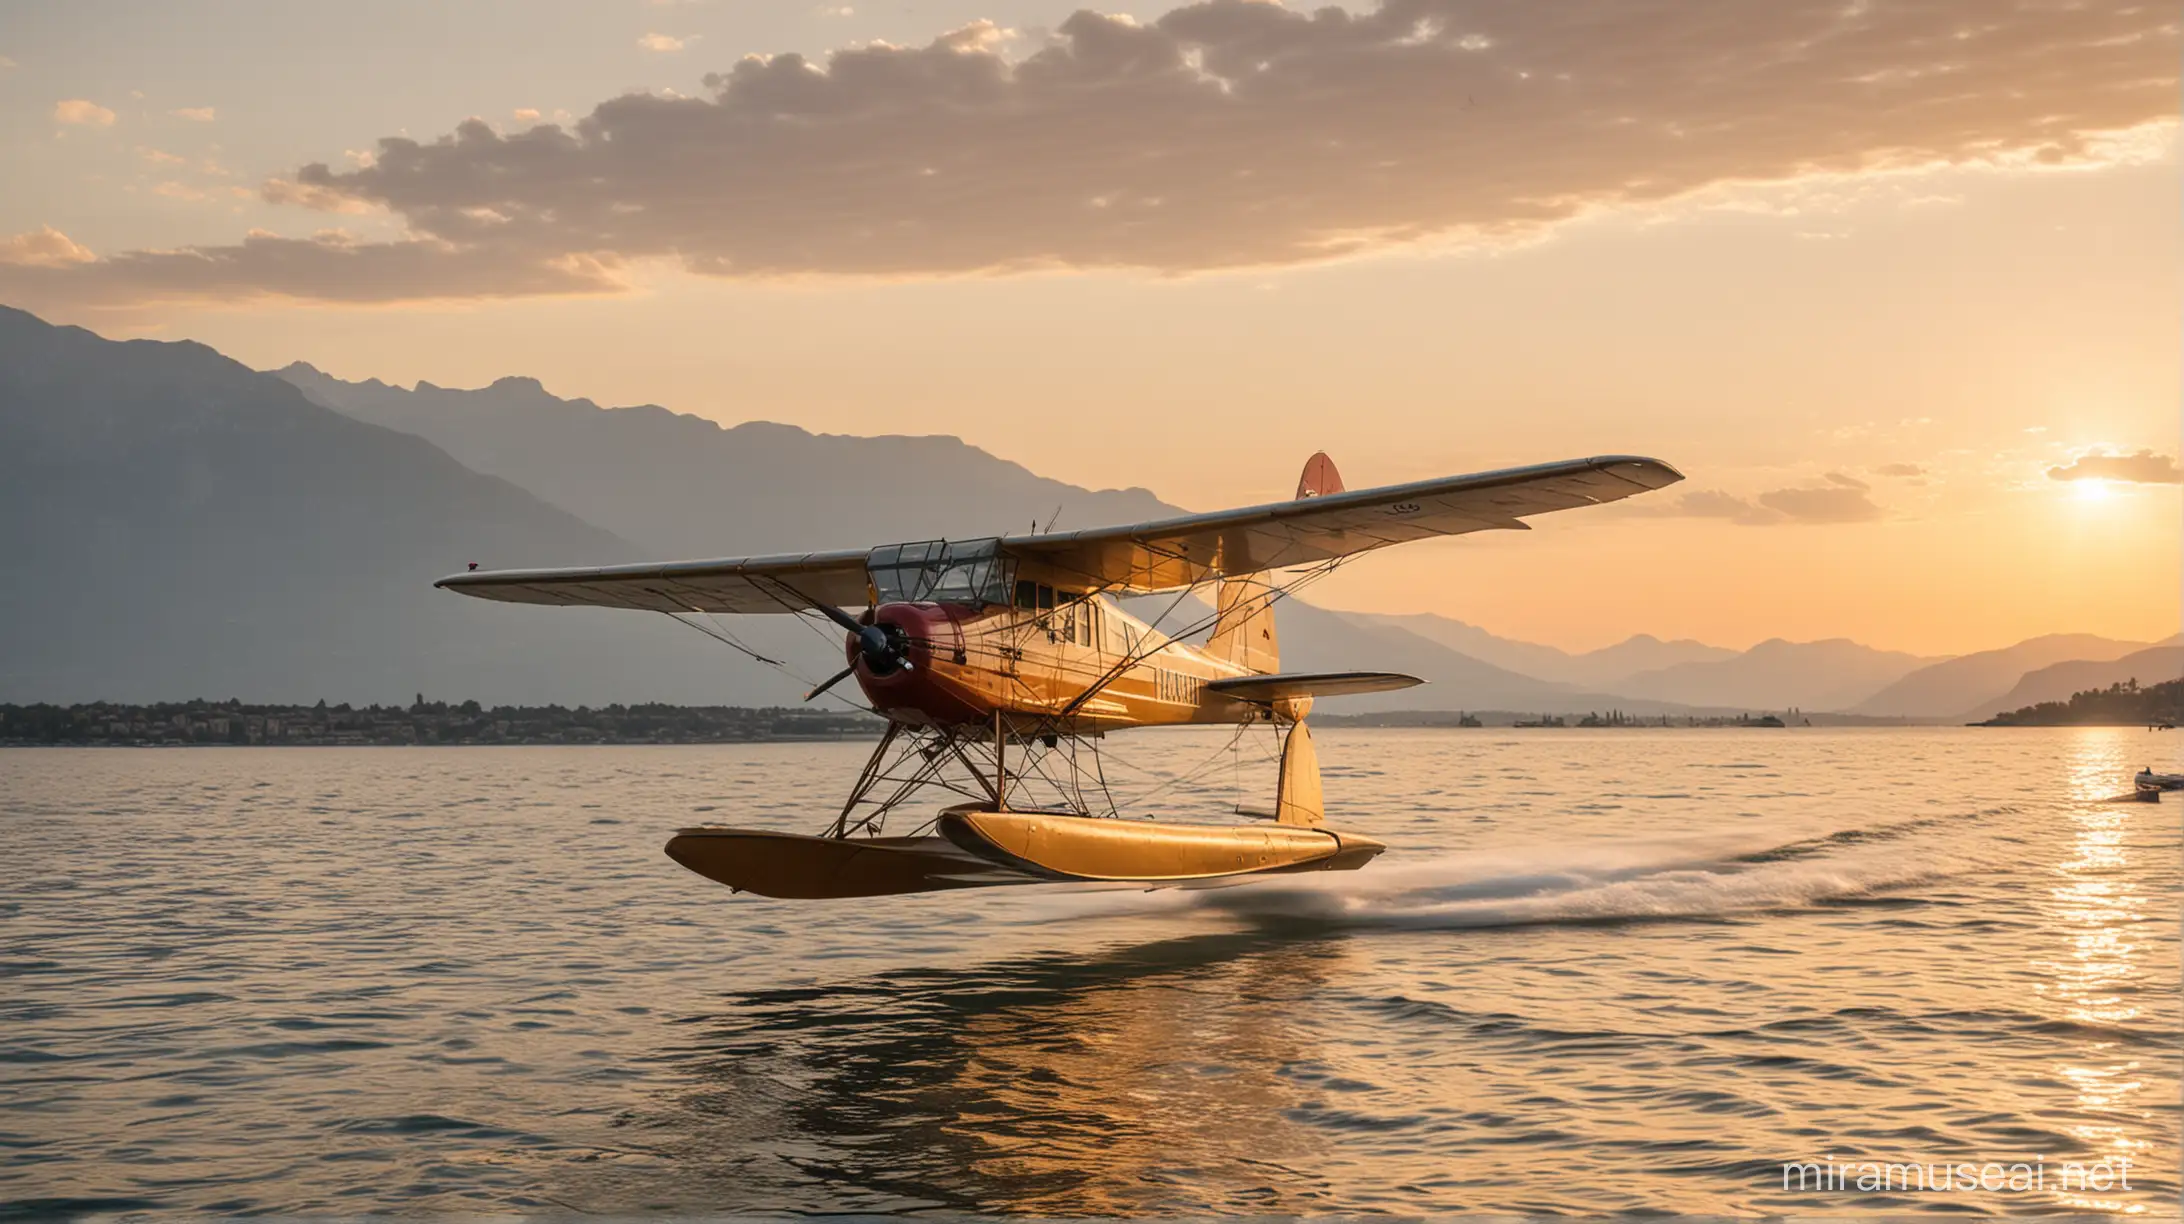 seaplane from the early 20th century landing on Lake Geneva at sunset